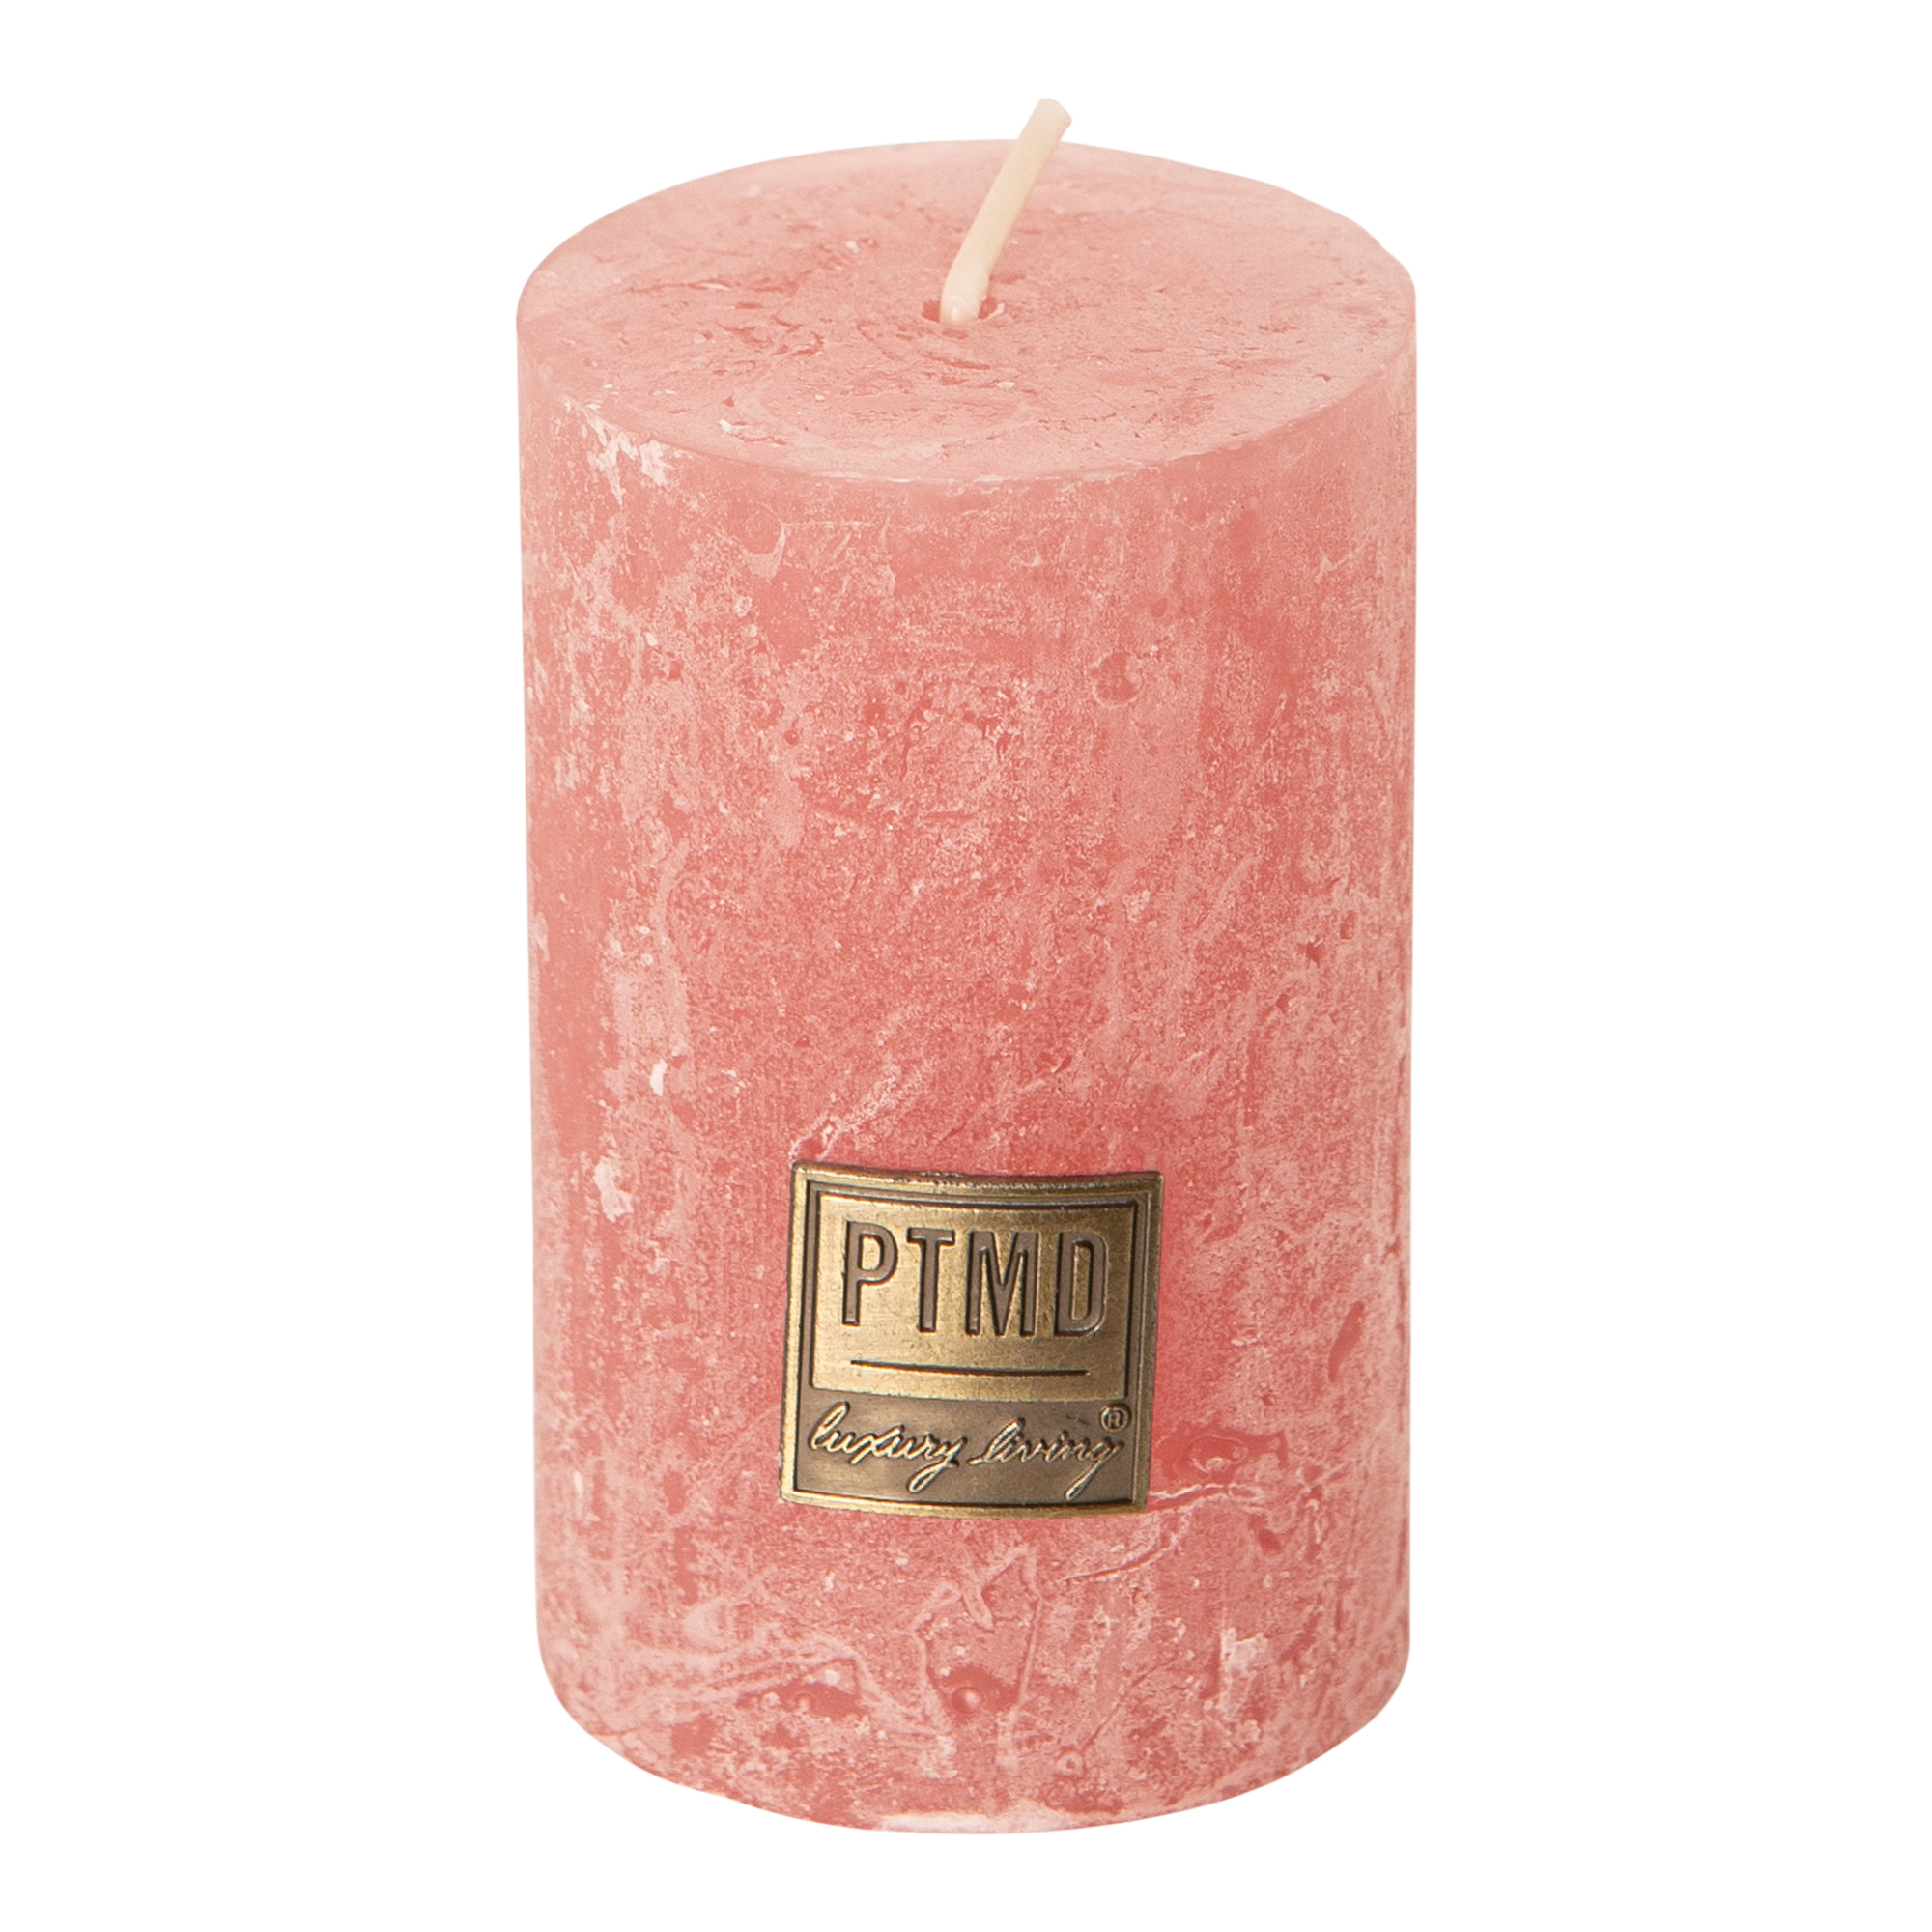 ptmd-8-x-5cm-blush-pink-rustic-pillar-candle